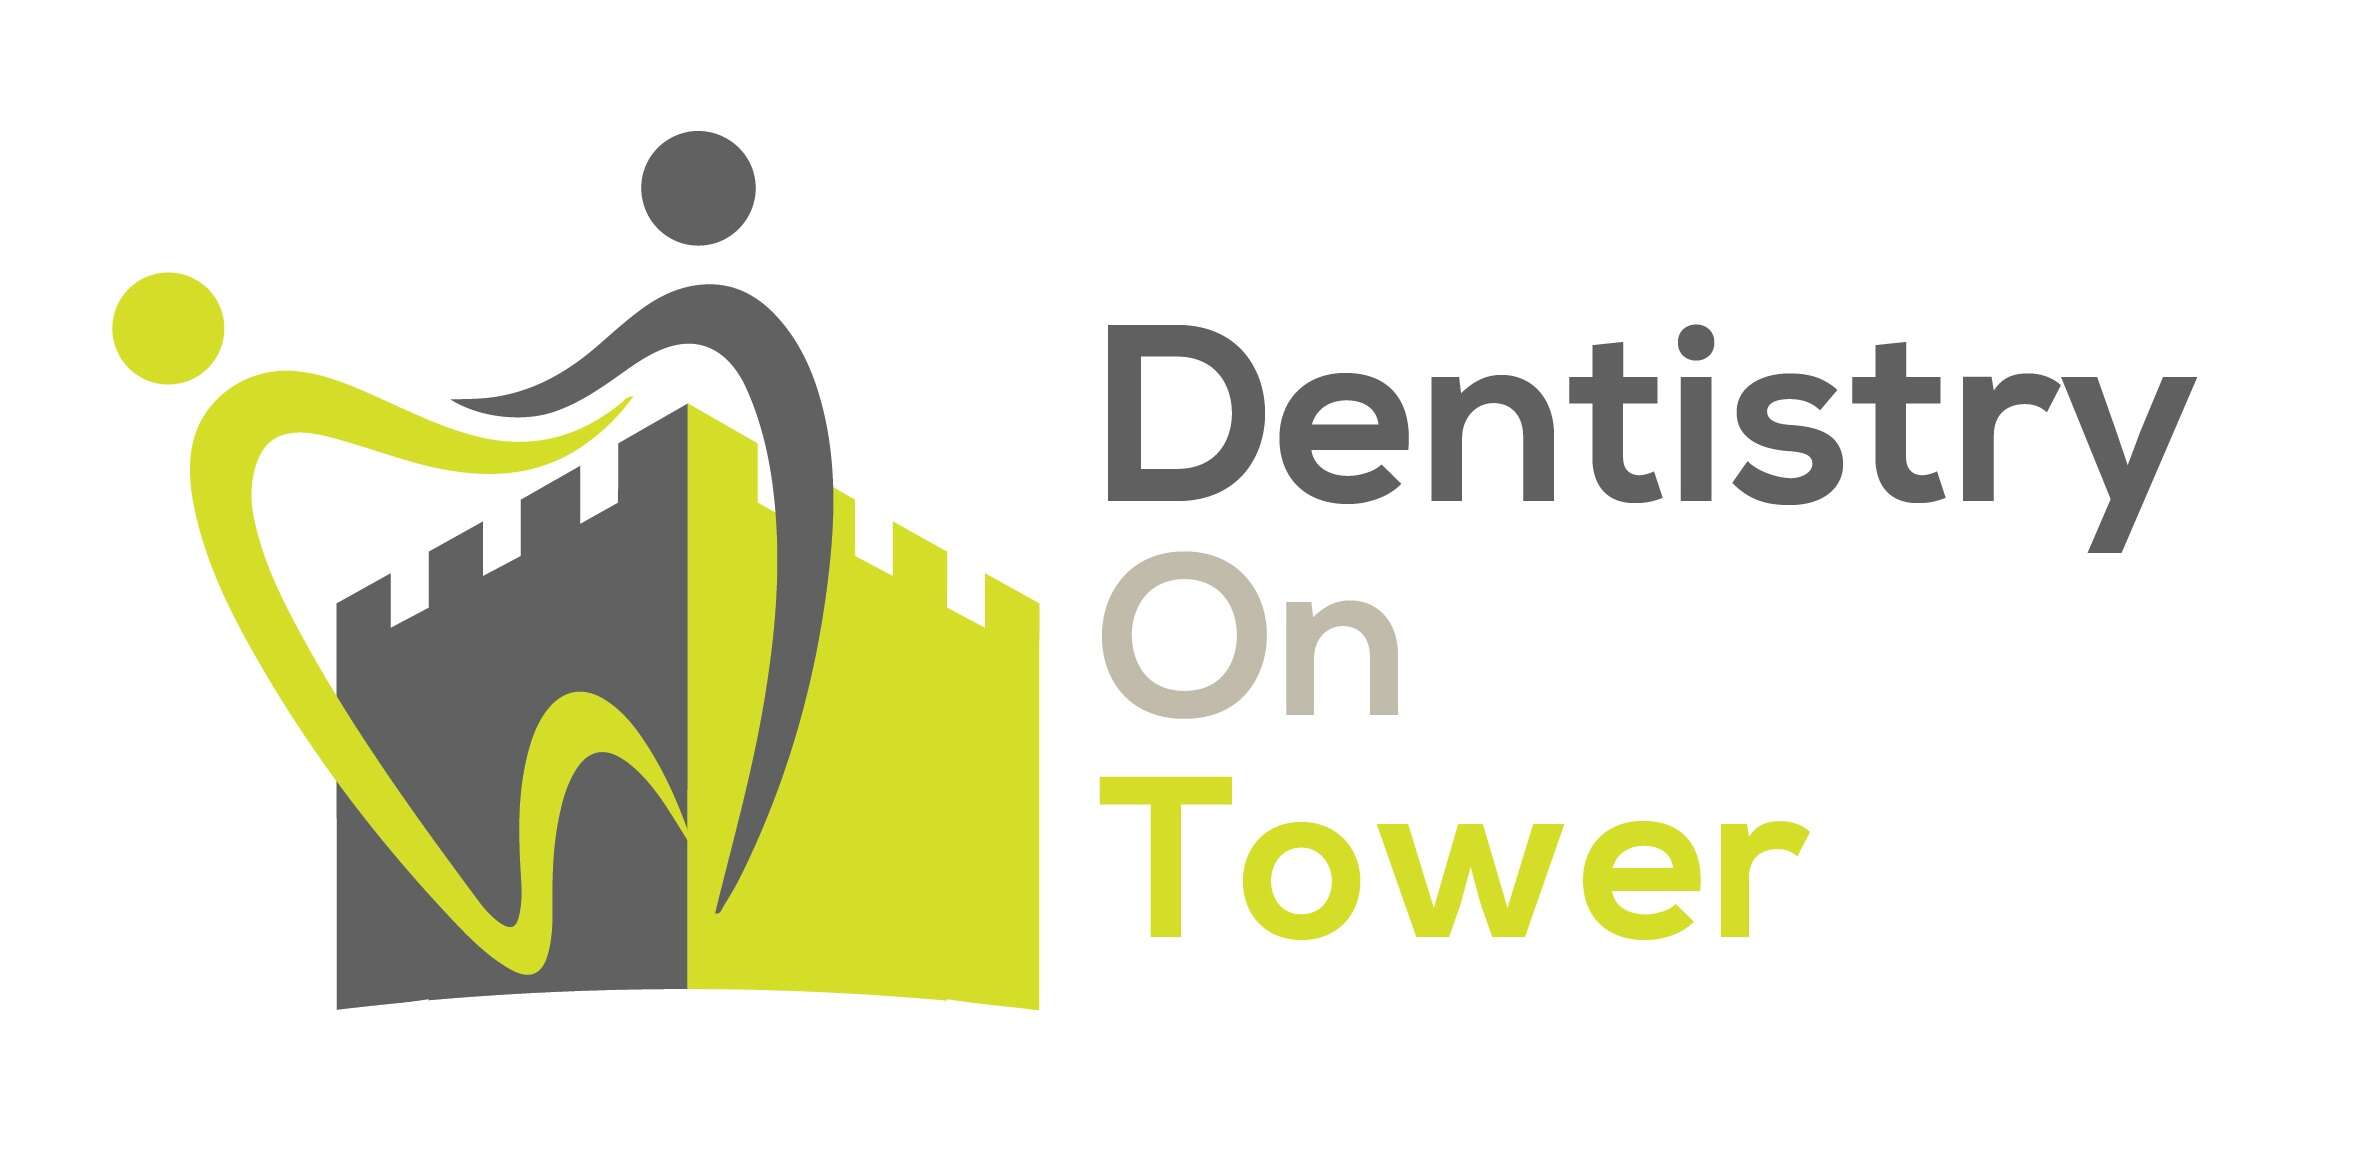 Dentistry on Tower